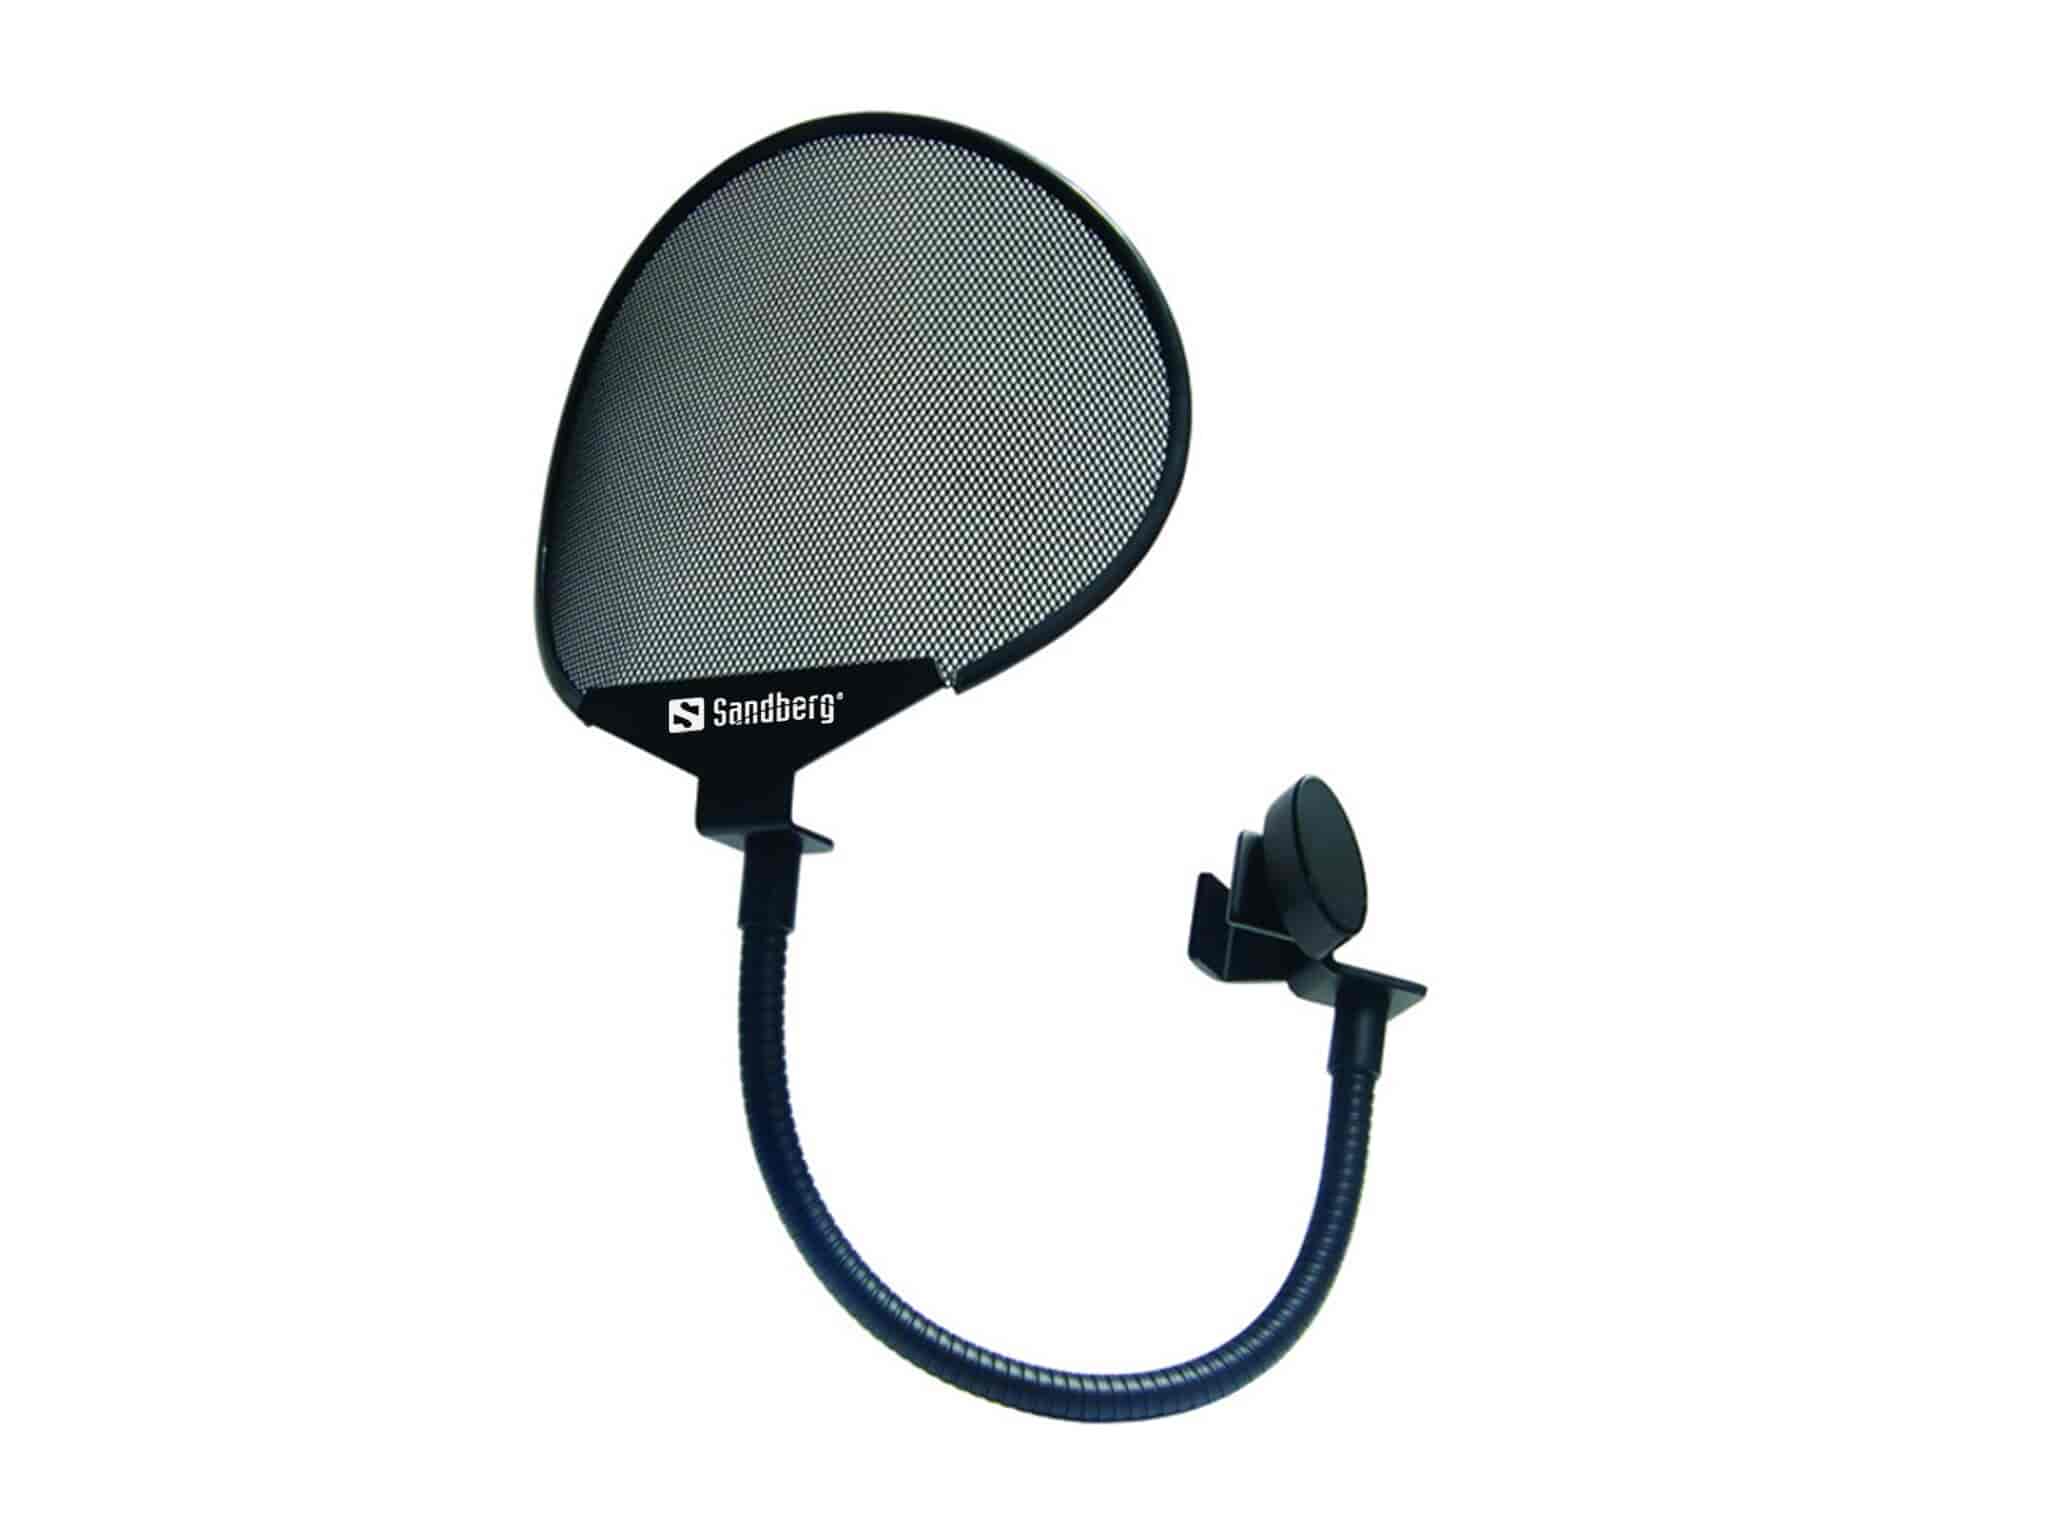 Sandberg Popfilter for MicrophoneThe pop filter reduces noise in the microphone that can be caused by sudden changes in airflow. Perfect for optimising the quality of your audio recordings – and it gives a nice extra touch to your home studio. Easy to fit on the arm supplied. Robust metal construction.Sandberg